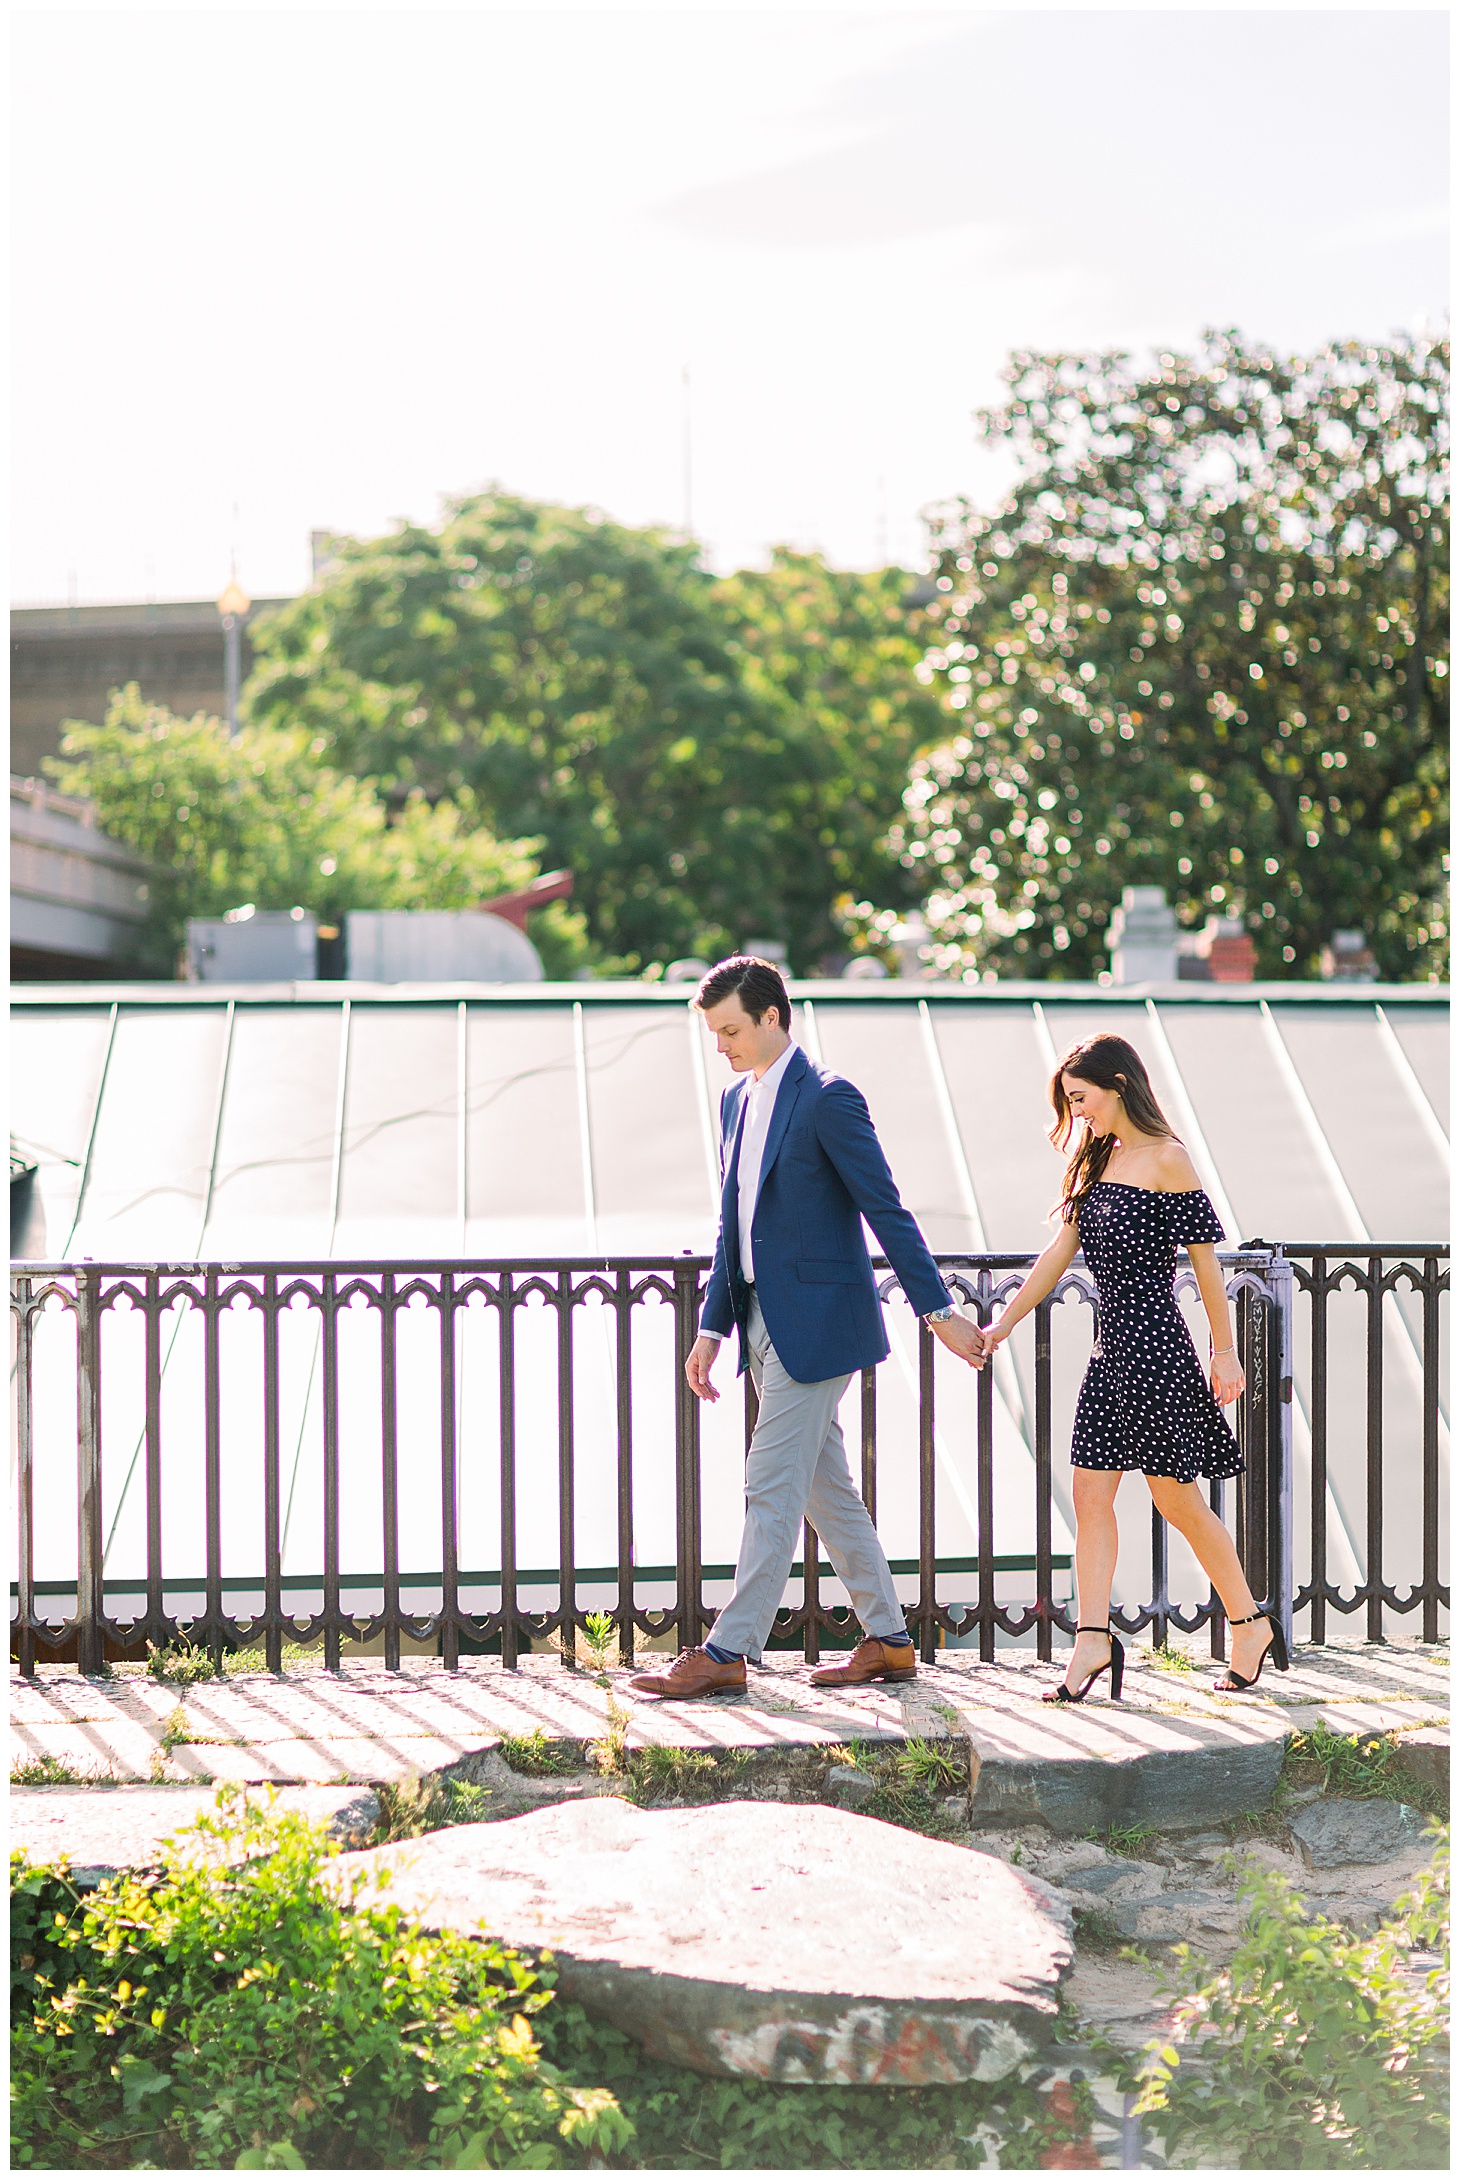 Sarah Bradshaw Photography, Preppy Morning Engagement Session with Golden Light and Golden Retriever